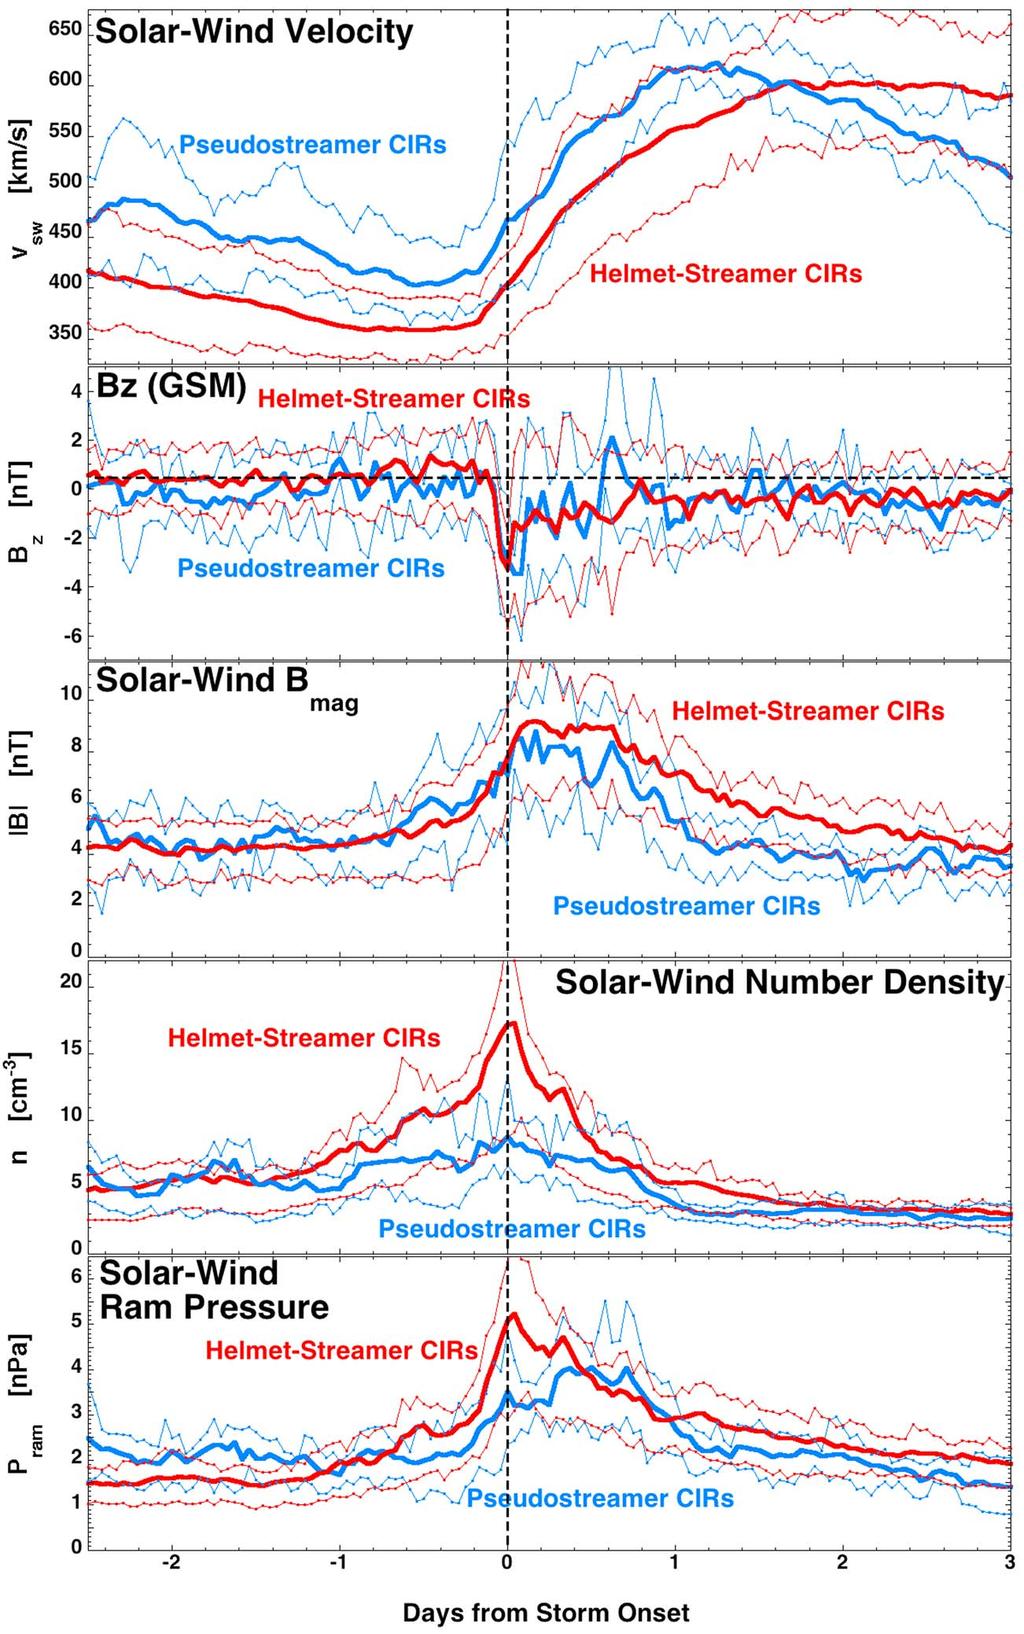 Figure 1. Superposed averages for several solar wind parameters with the zero epoch being the onset of storm levels of magnetospheric convection.